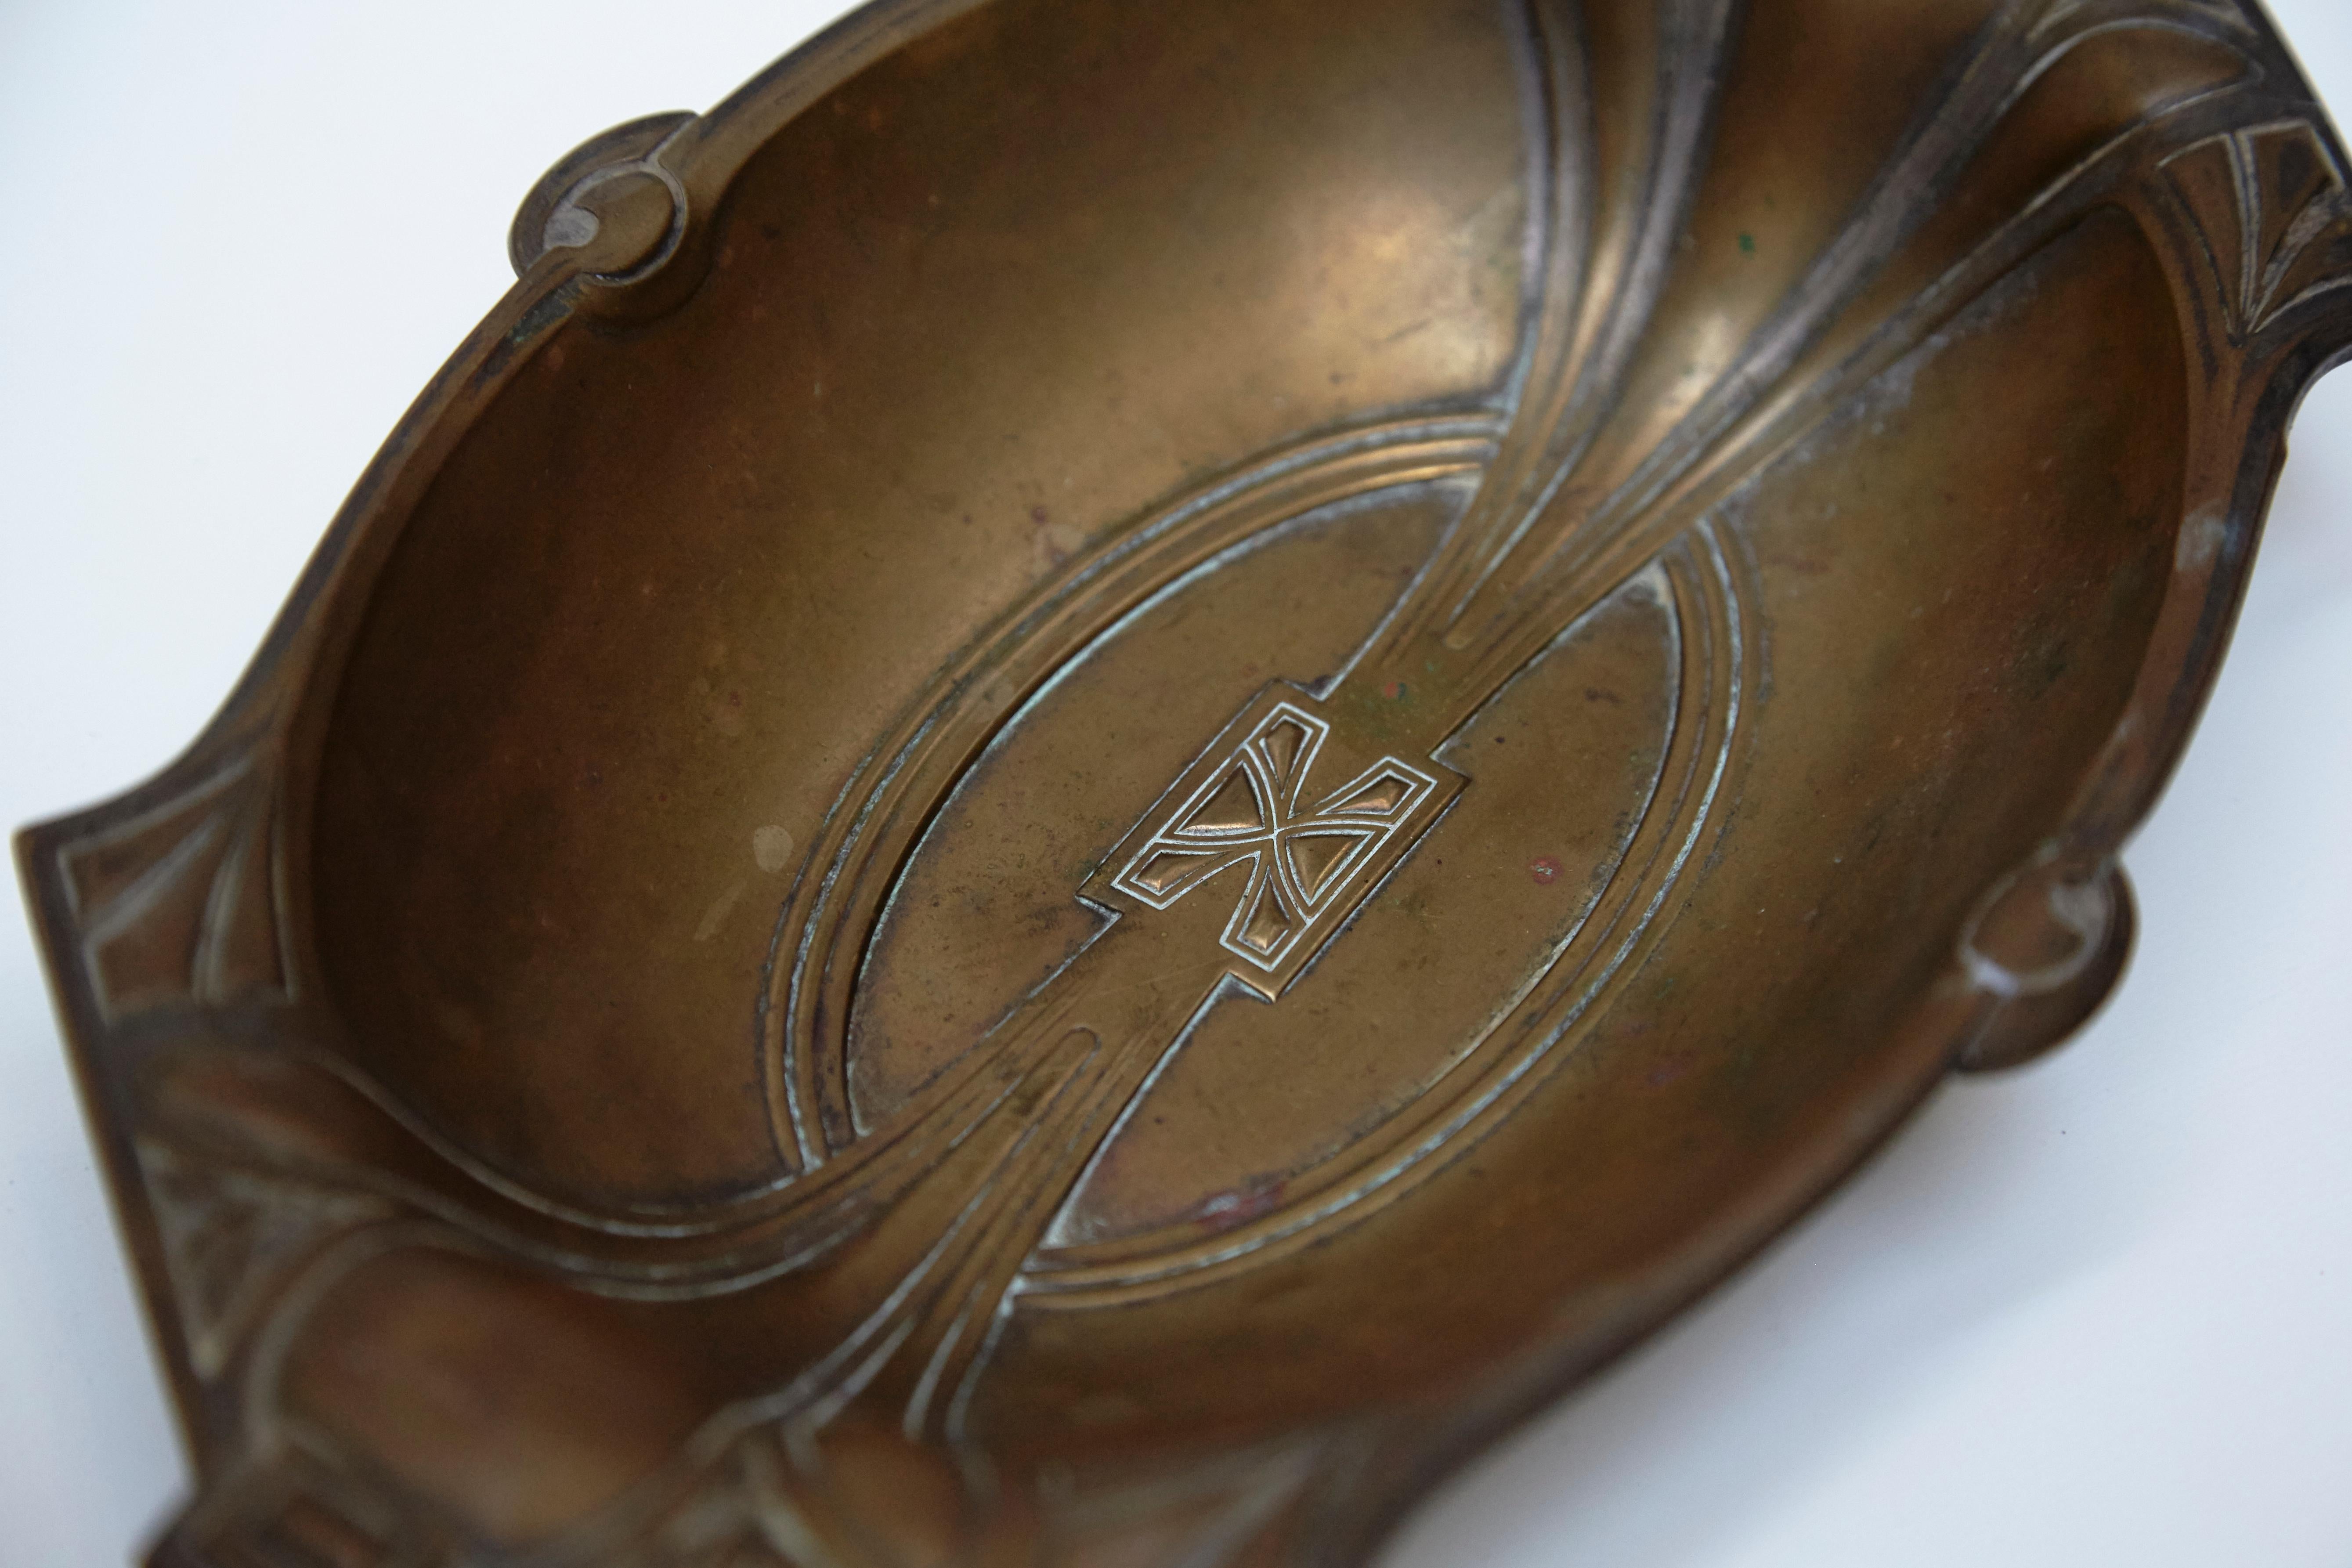 Catalan Modernist Copper Tray from Barcelona, circa 1920 For Sale 2